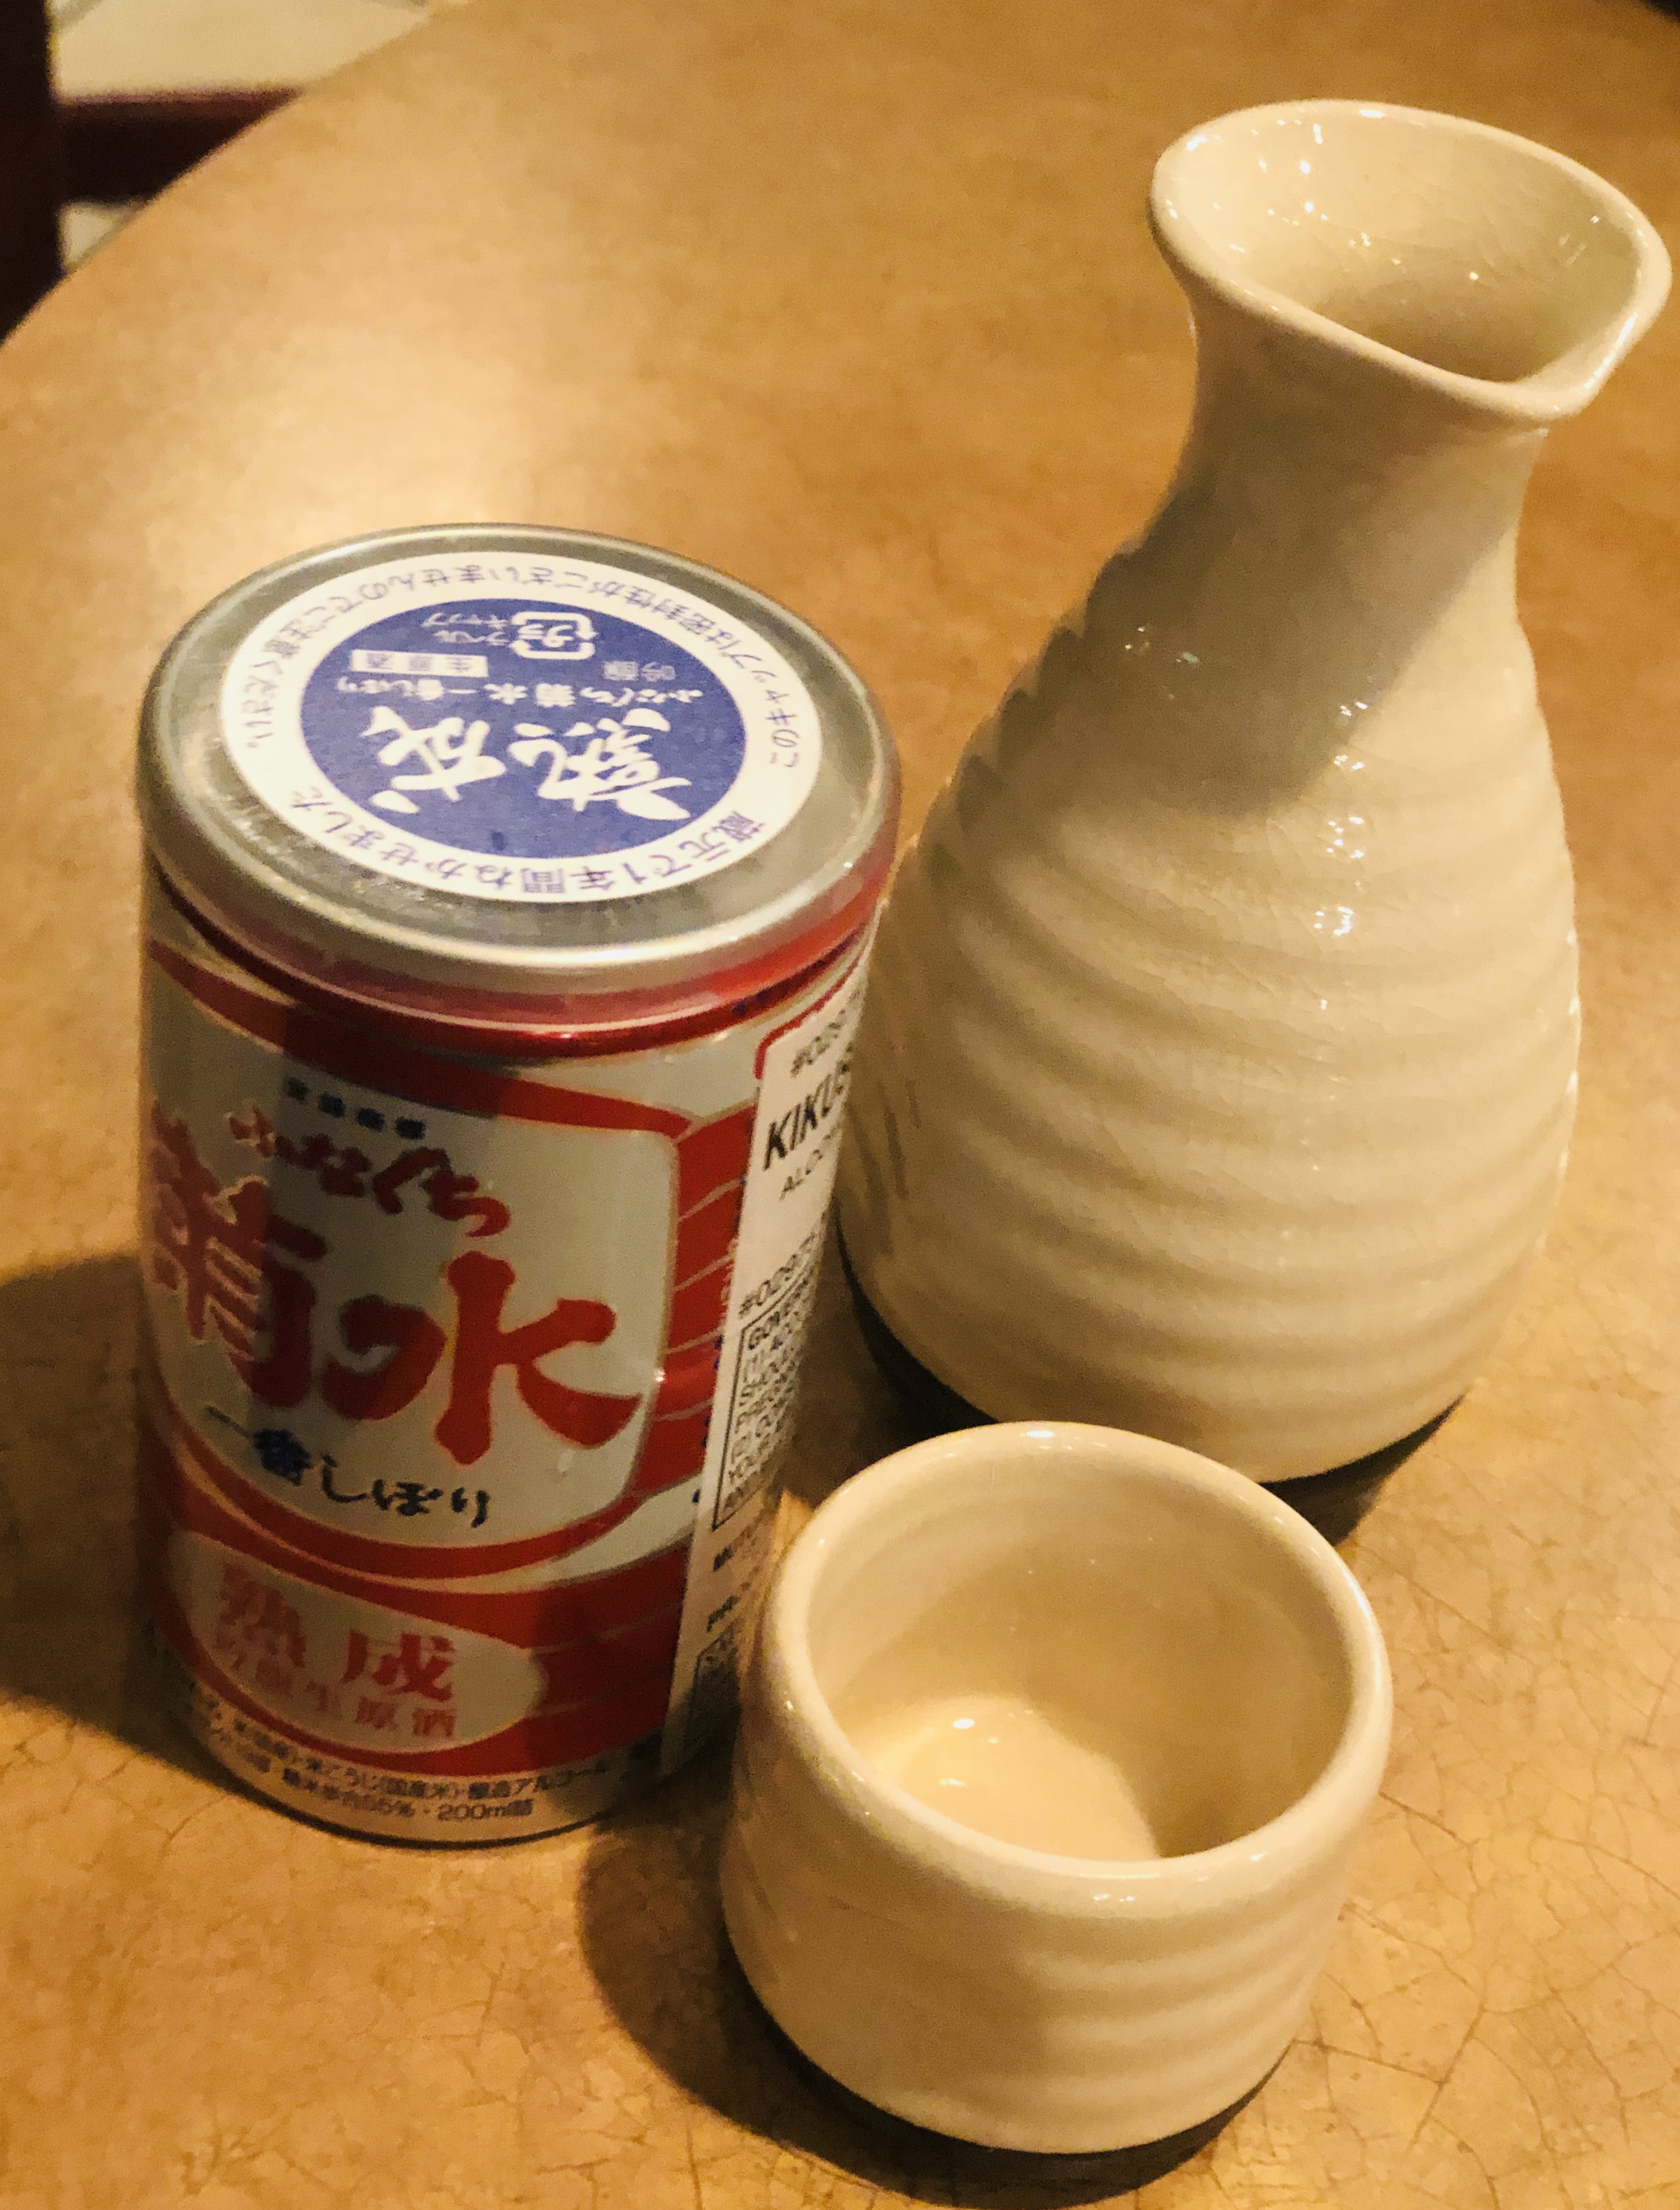 An introduction to sake in C-U